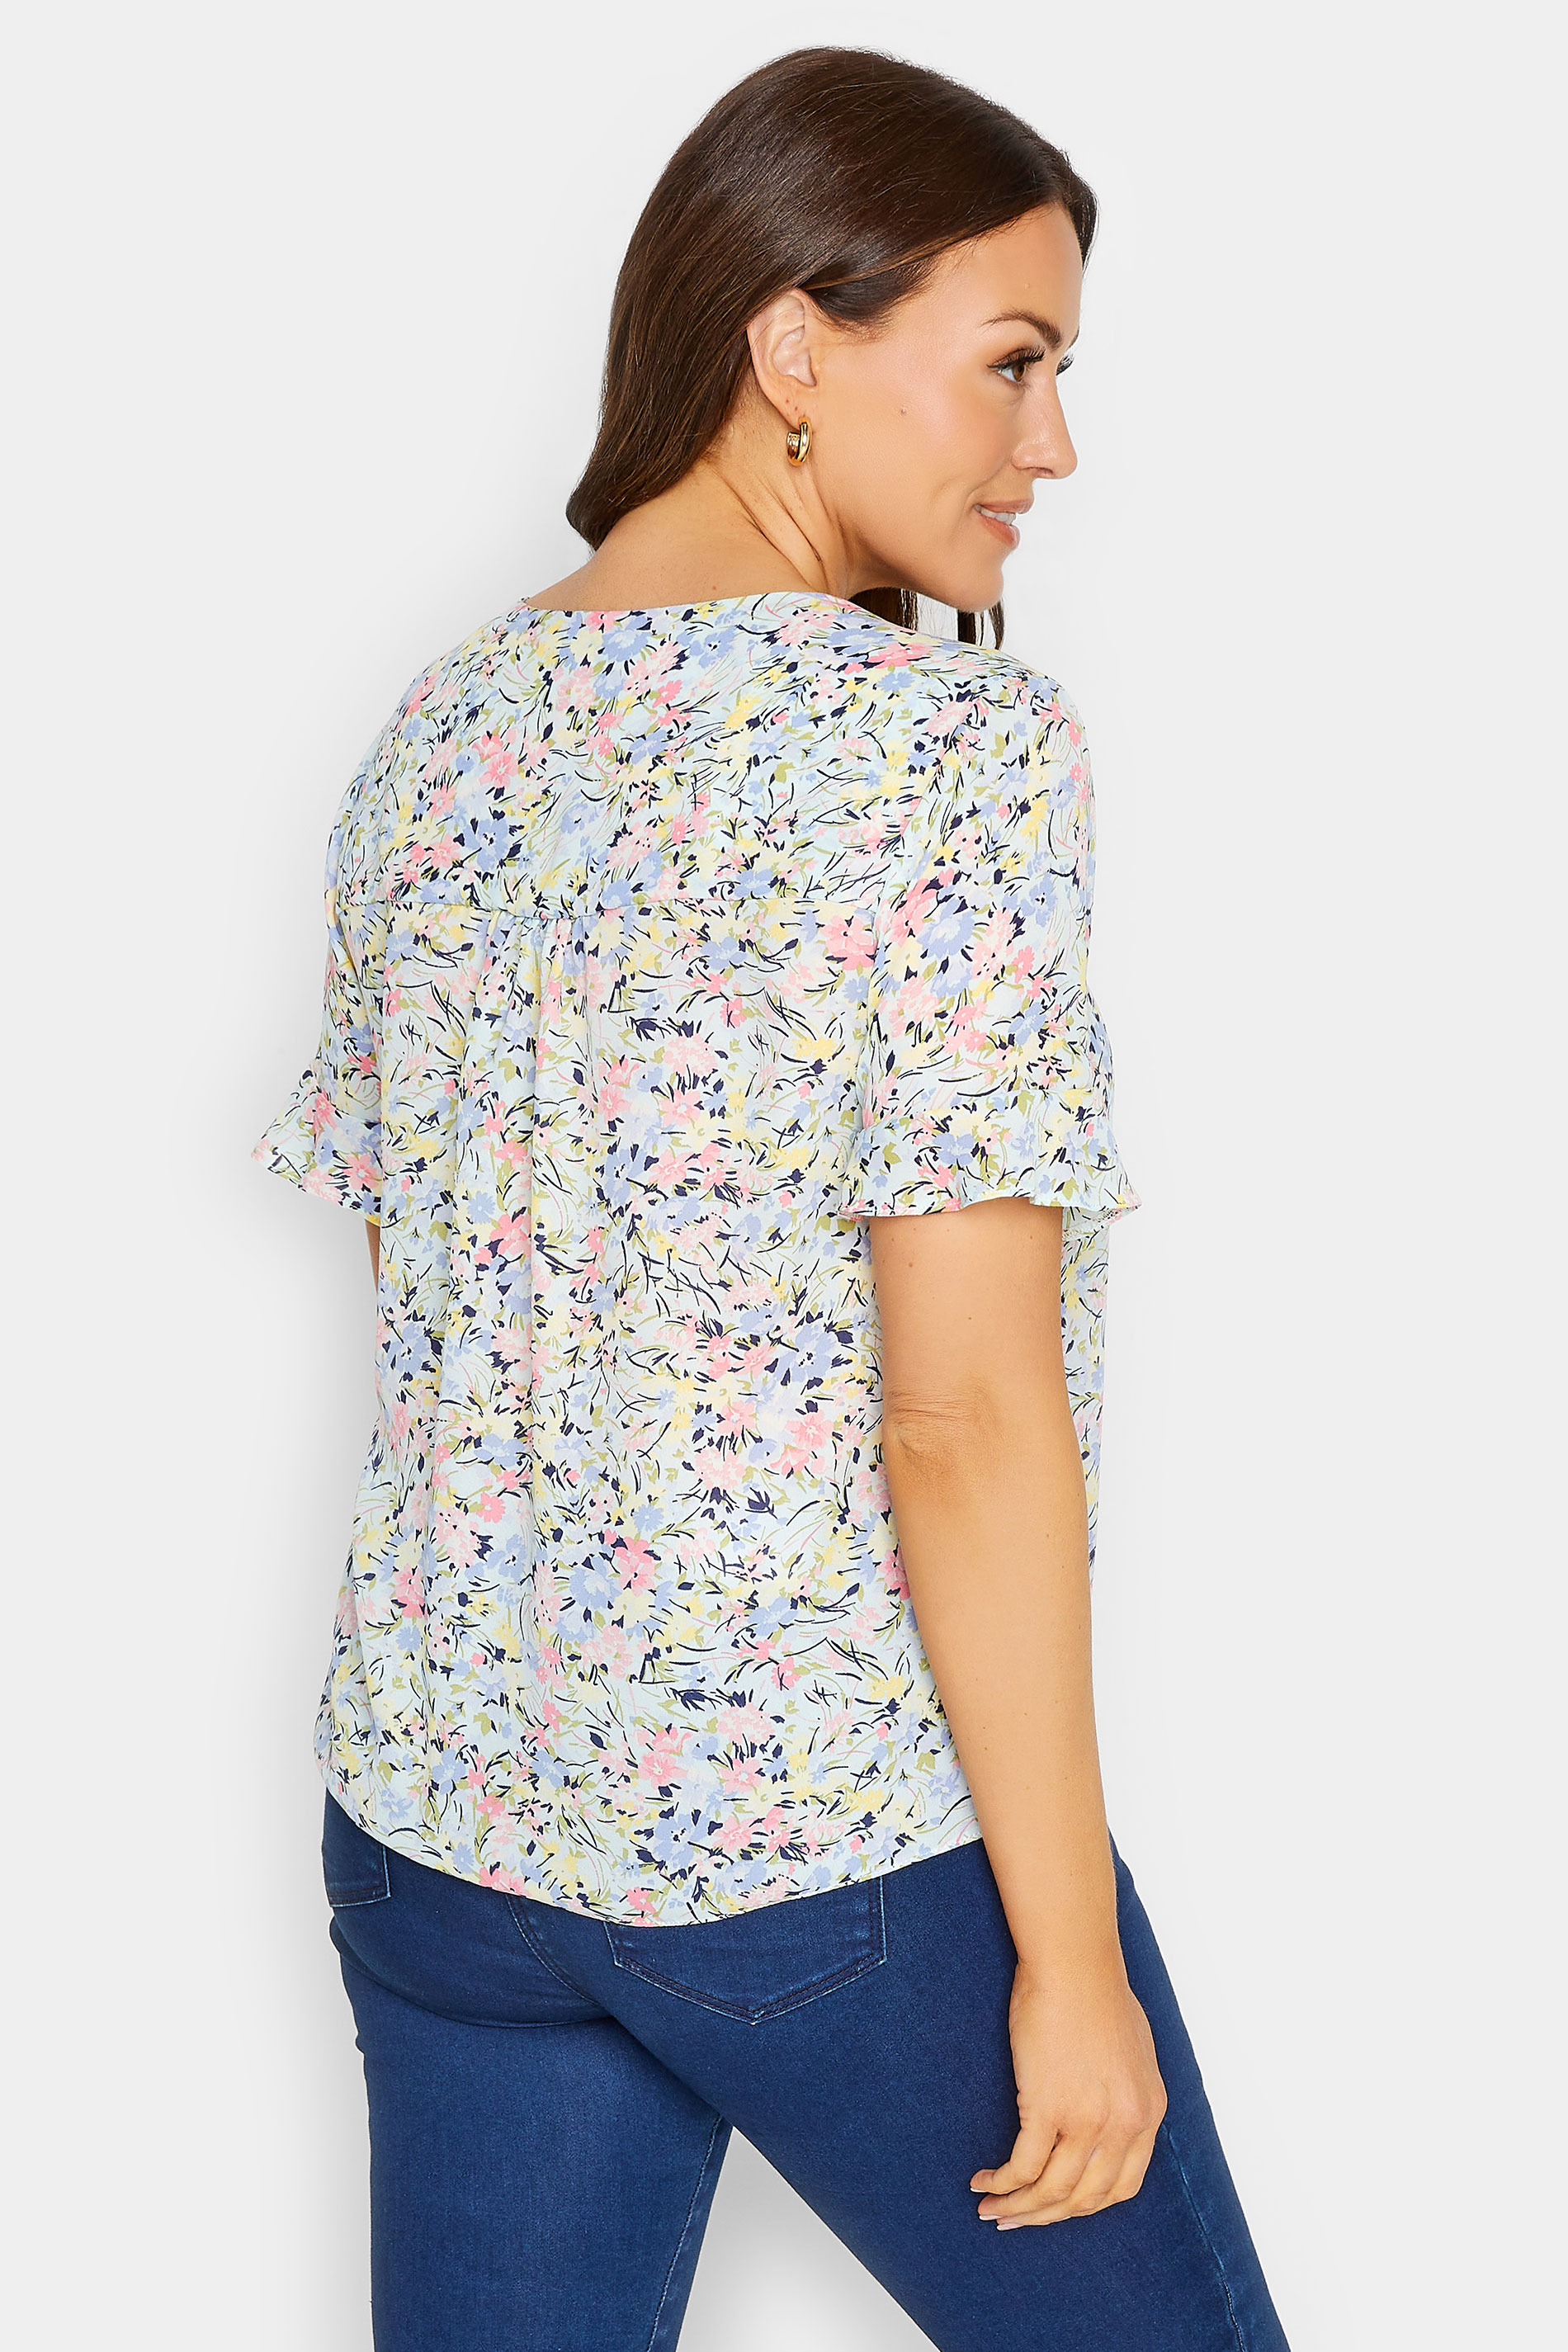 M&Co Blue Floral Print Frill Sleeve Blouse | M&Co 3